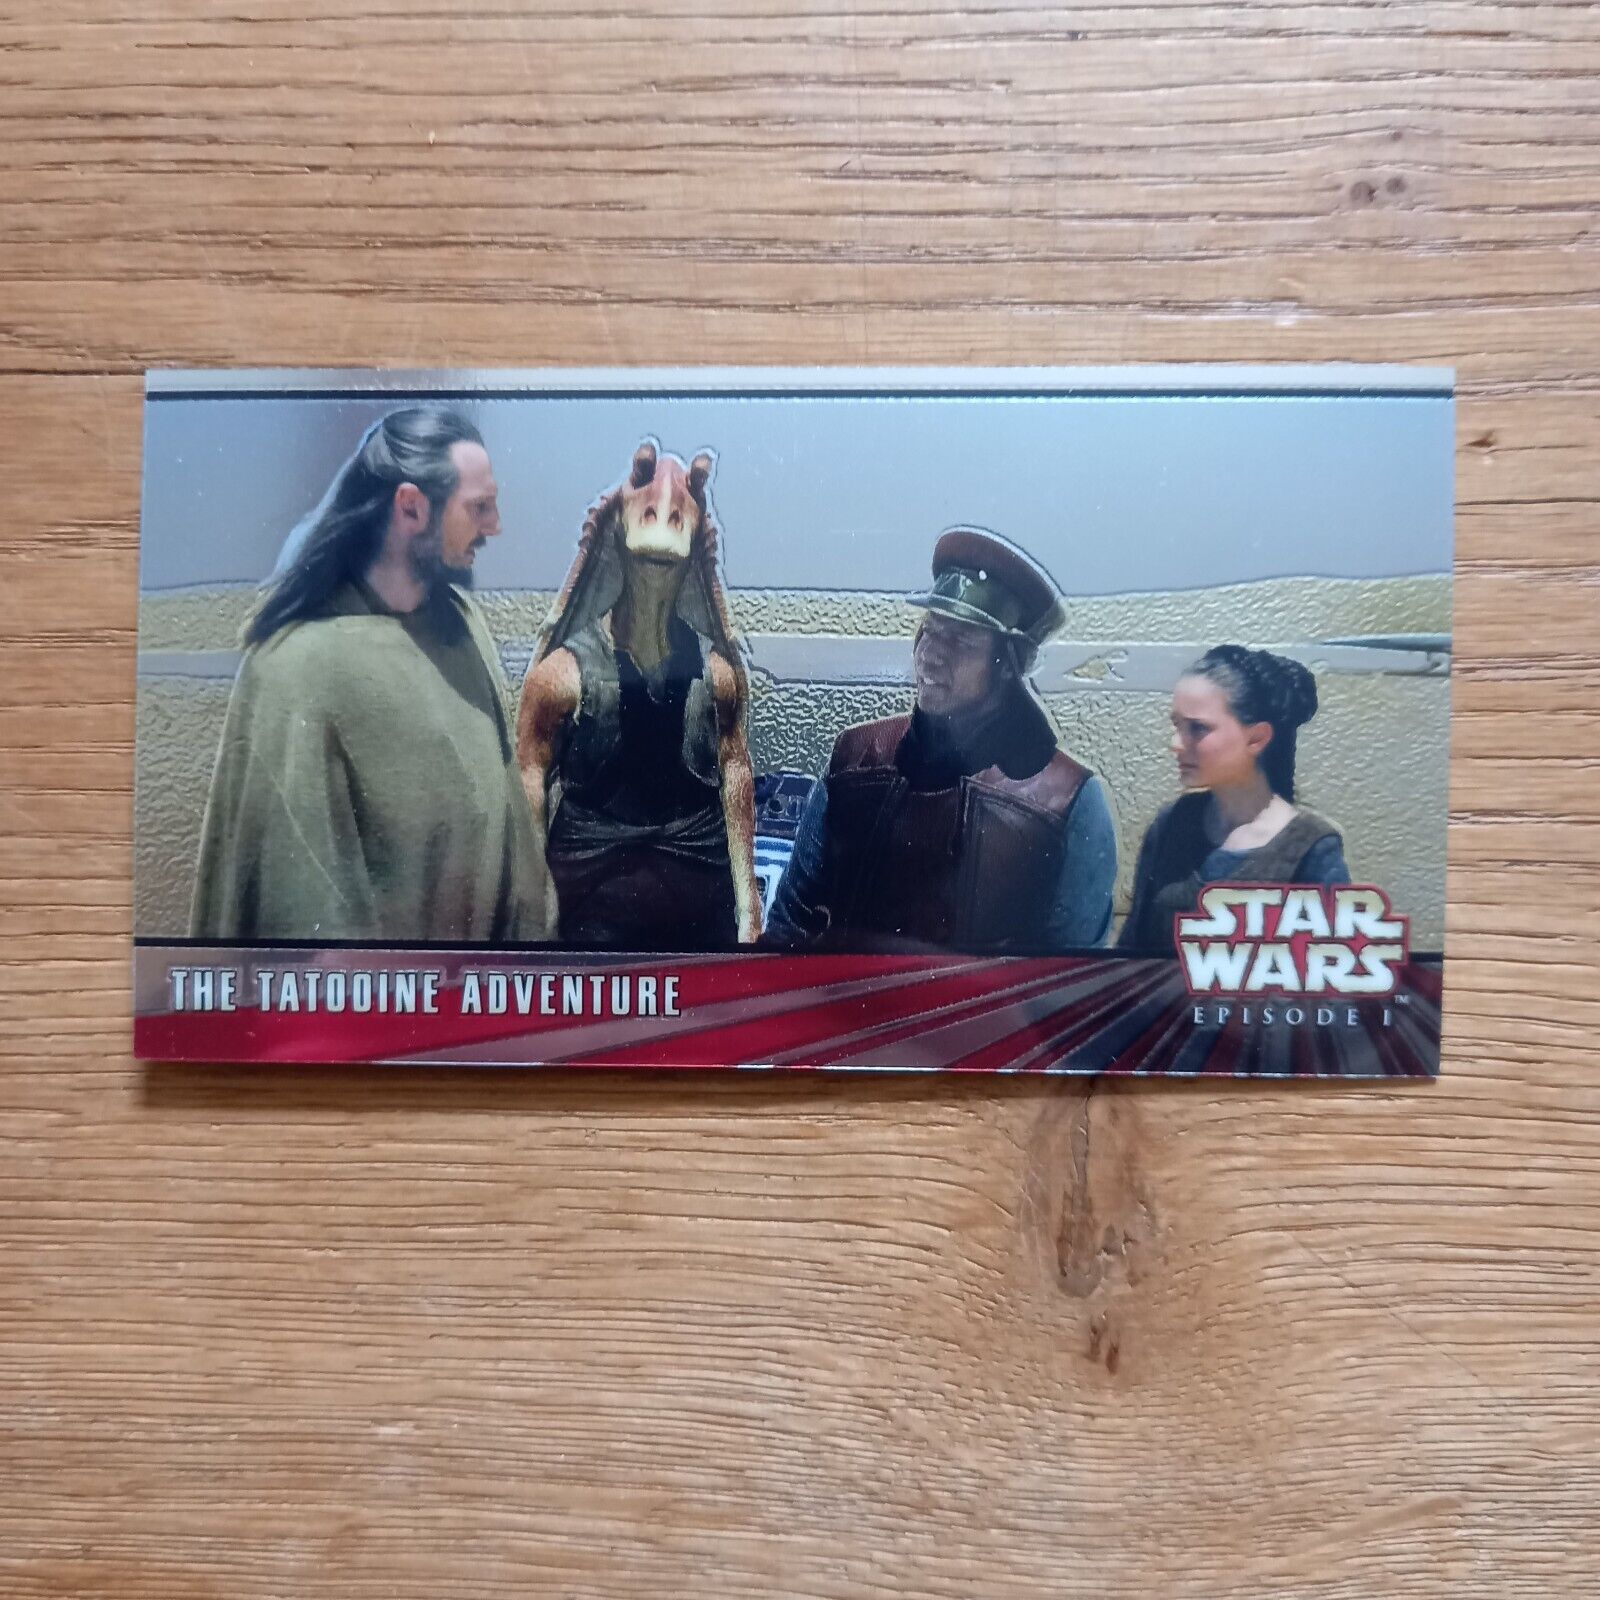 1999 Topps Star Wars Episode 1 Widevision Series 1 Foil The Tatootine Adventure